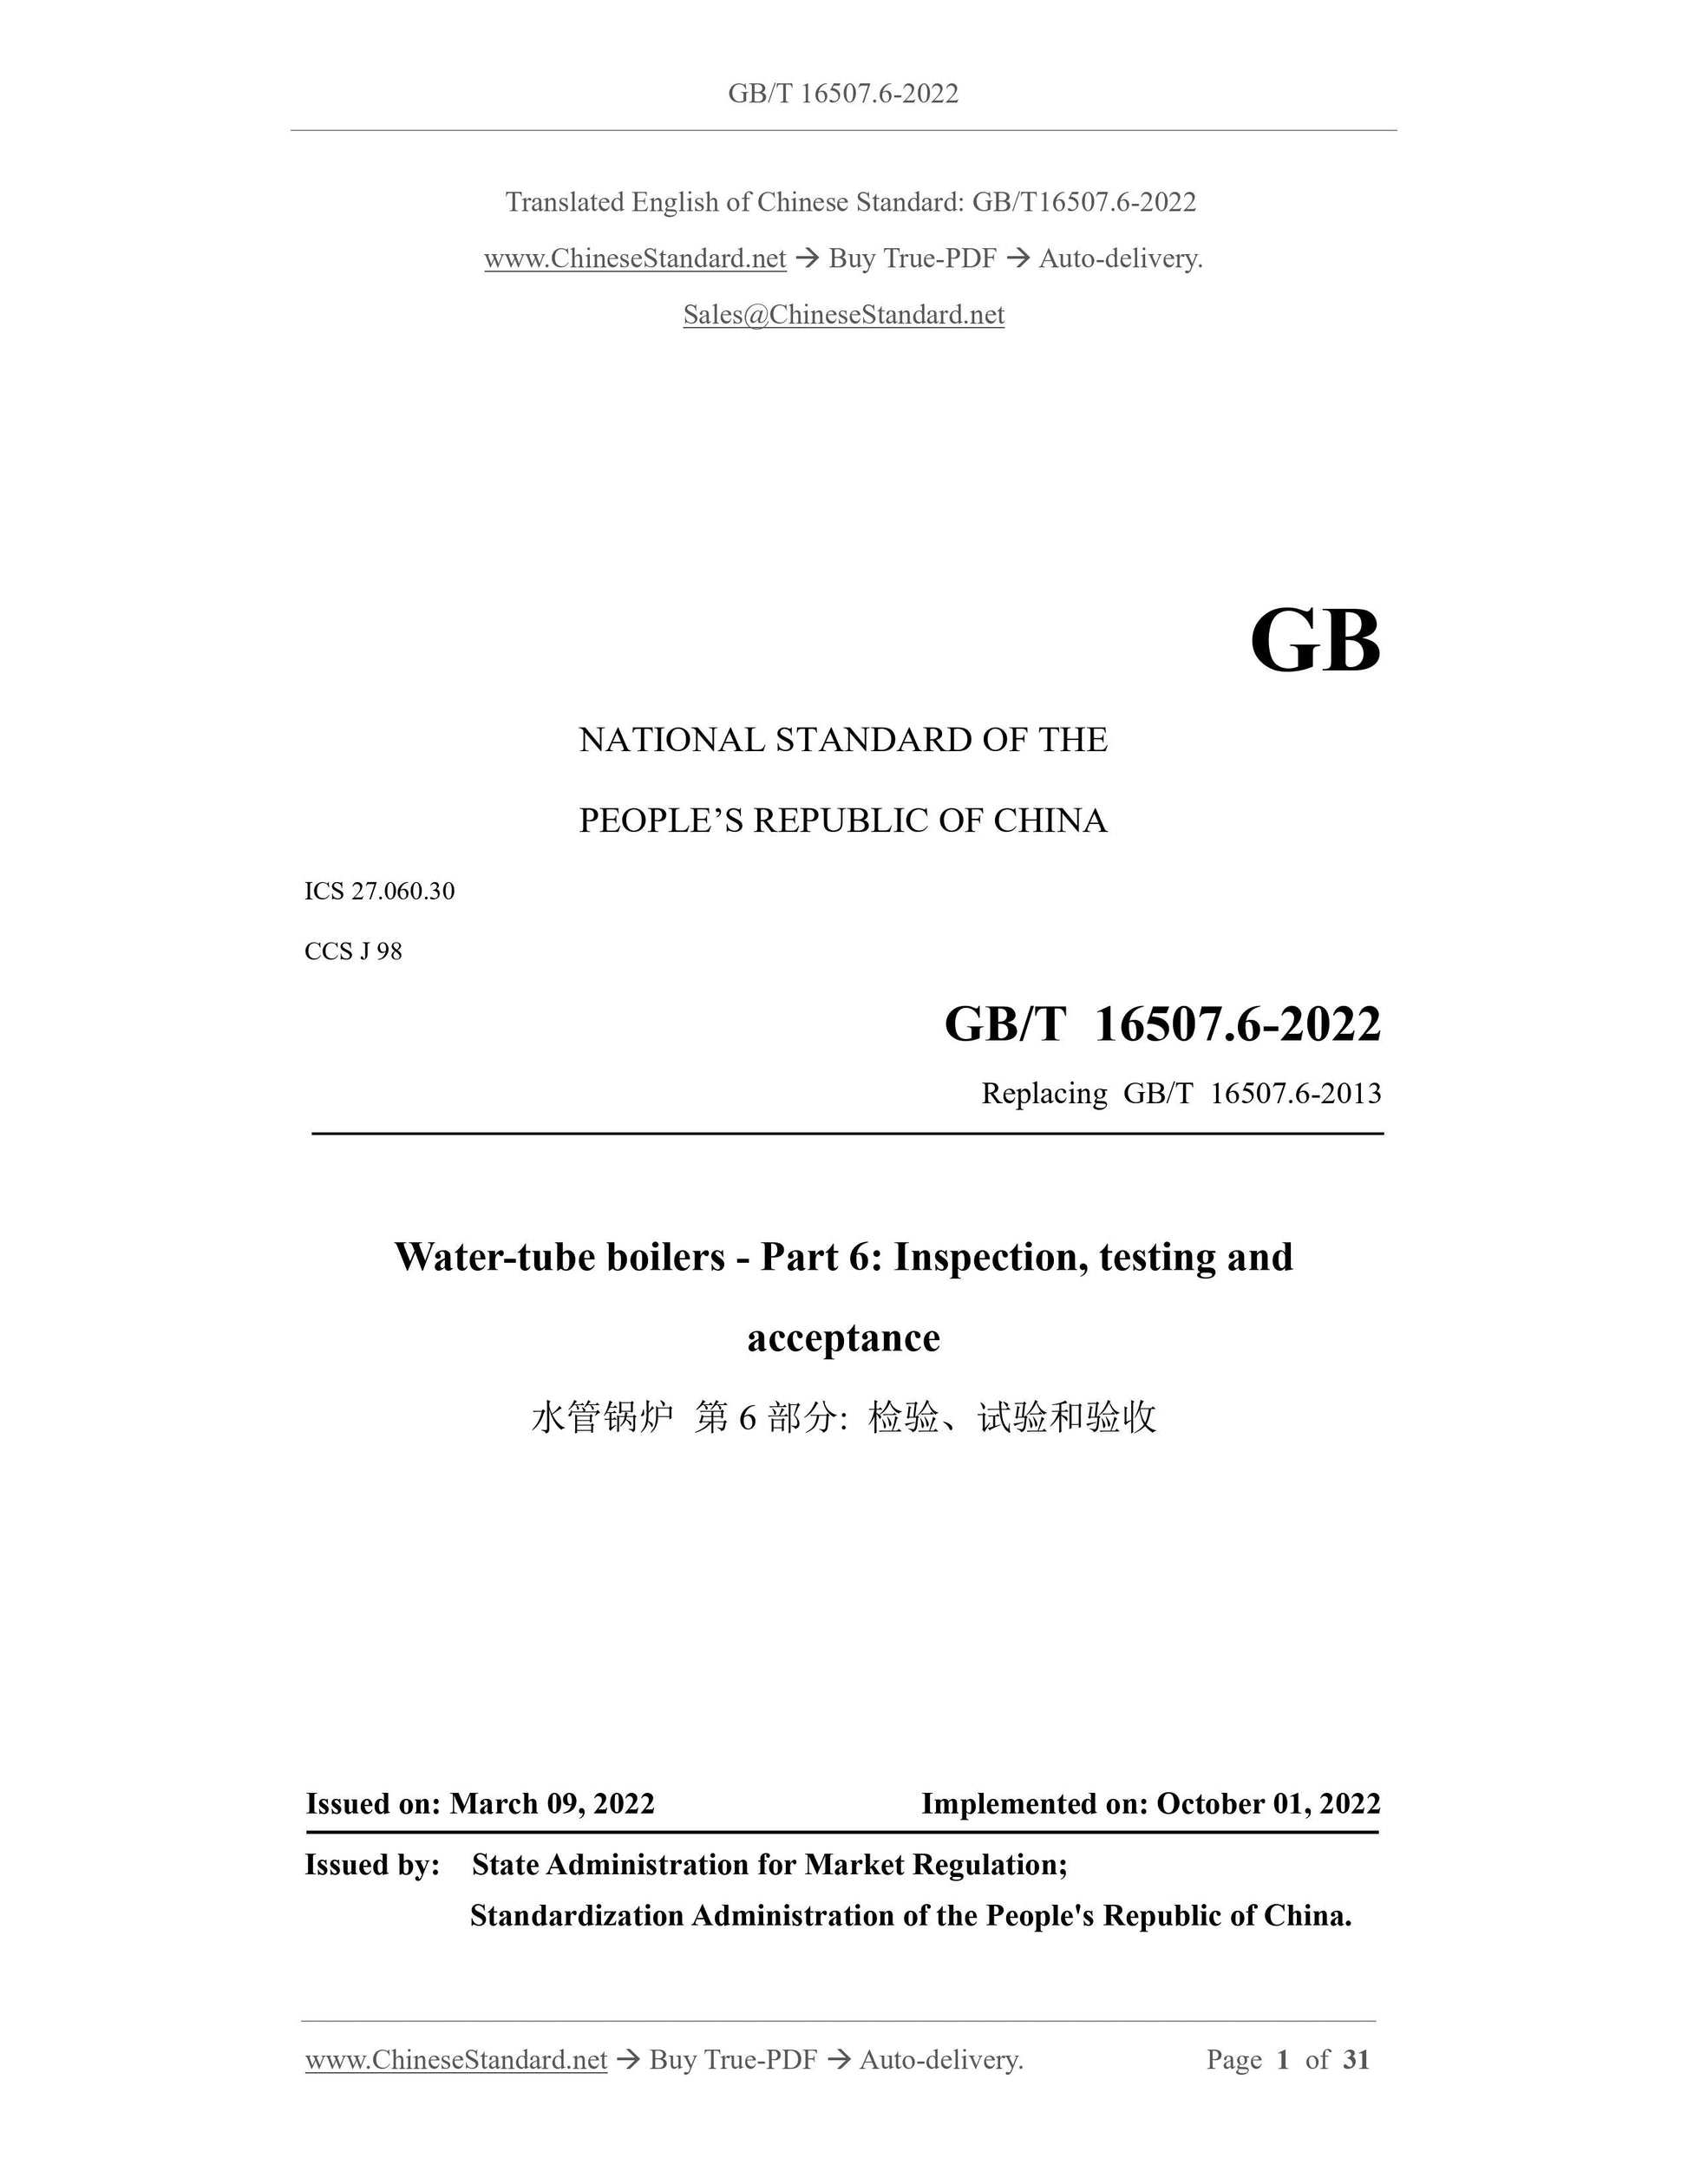 GB/T 16507.6-2022 Page 1